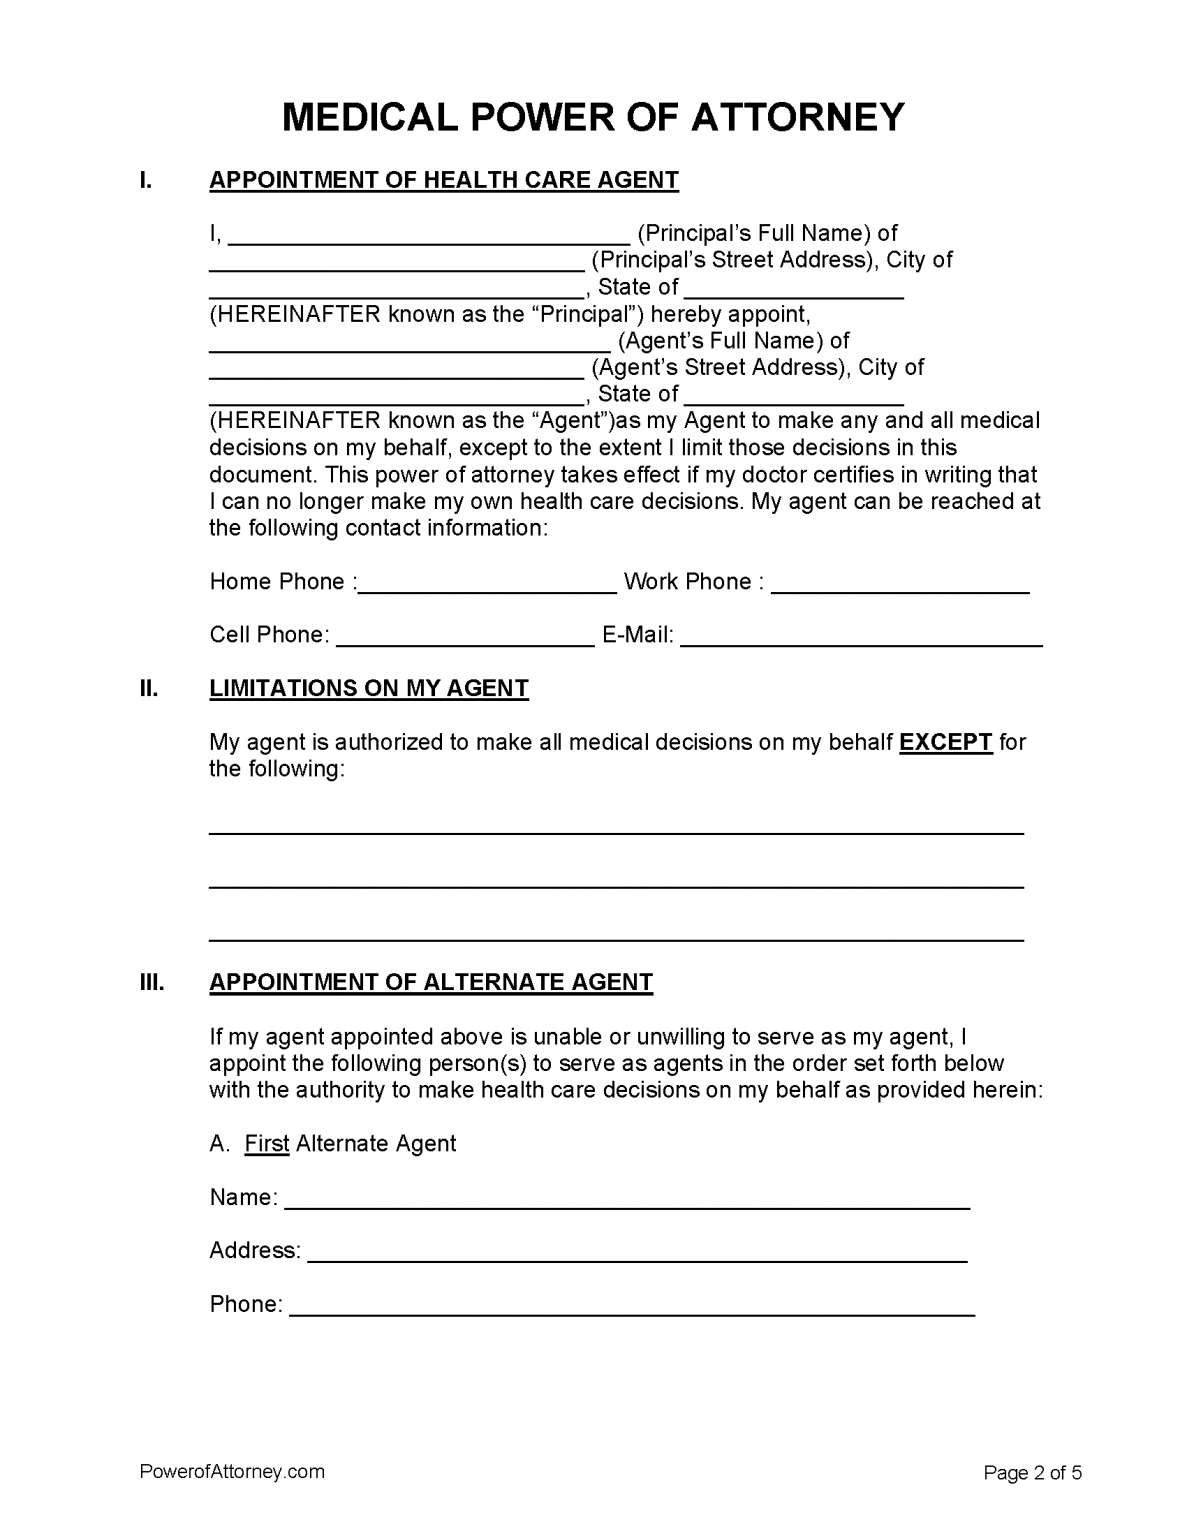 Free Medical (Health Care) Power of Attorney Forms